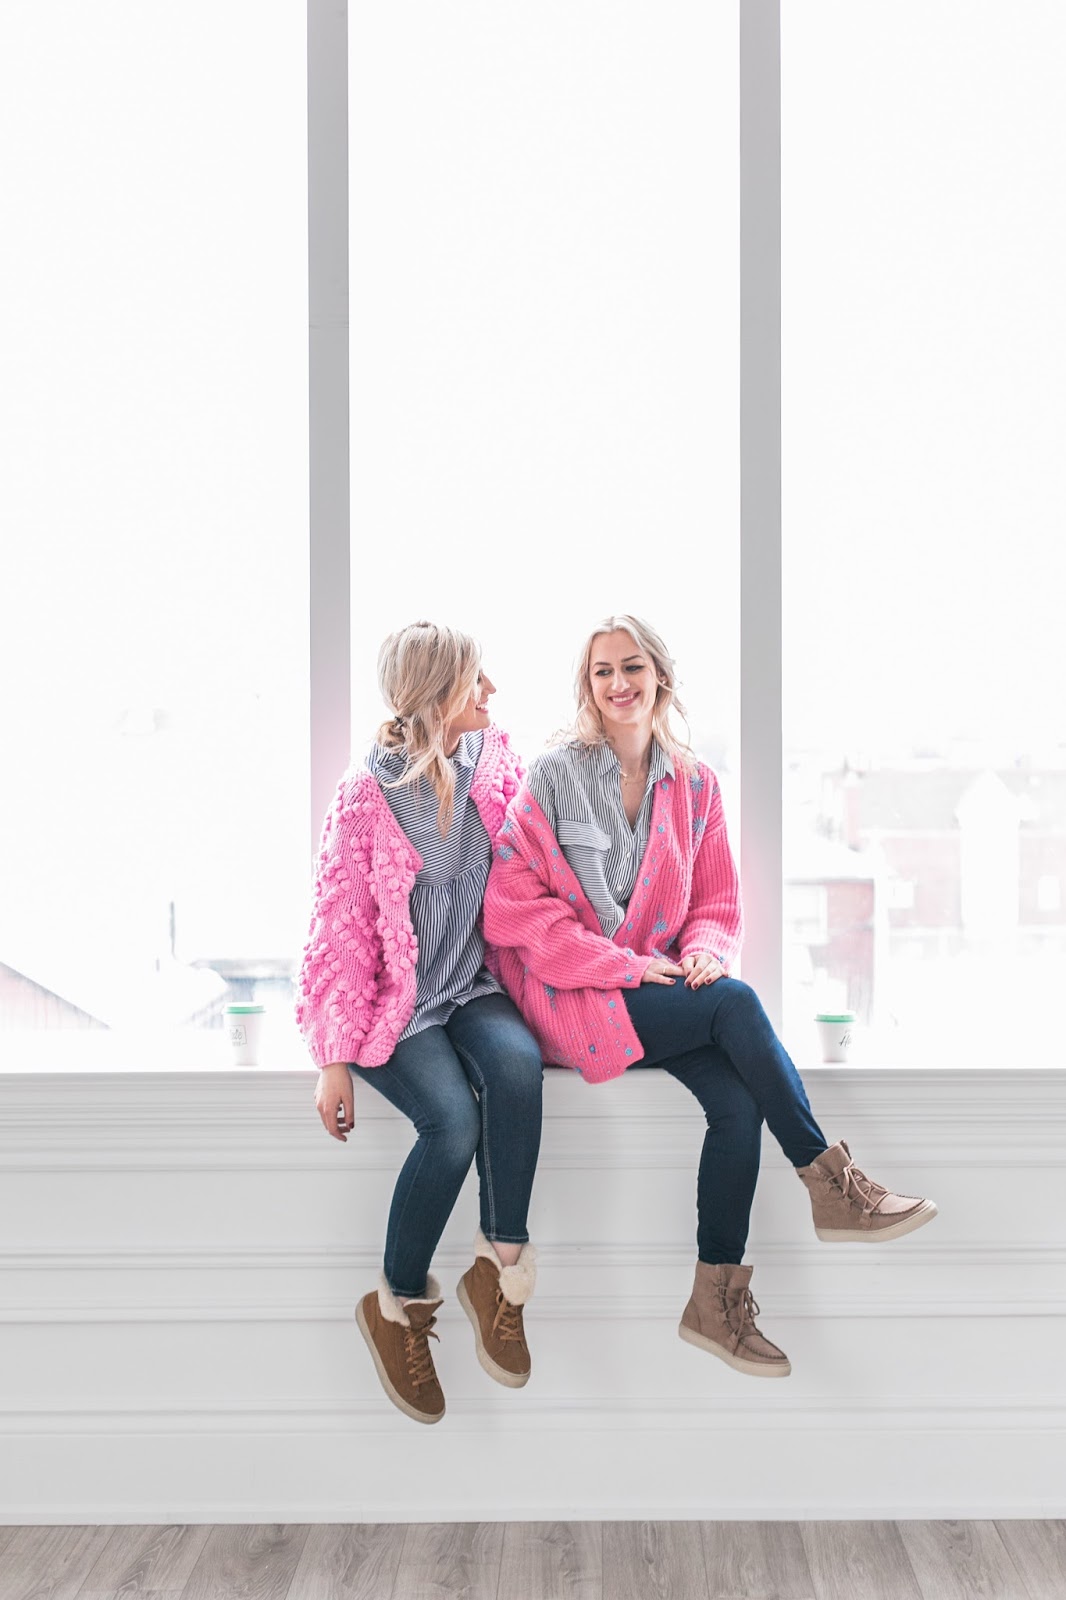 Bijuleni | 2 Transitional Boots You Need For Spring | Sisters wearing matching pink cozy Chicwish sweaters, skinny jeans and striped shirt. Cougar Boots